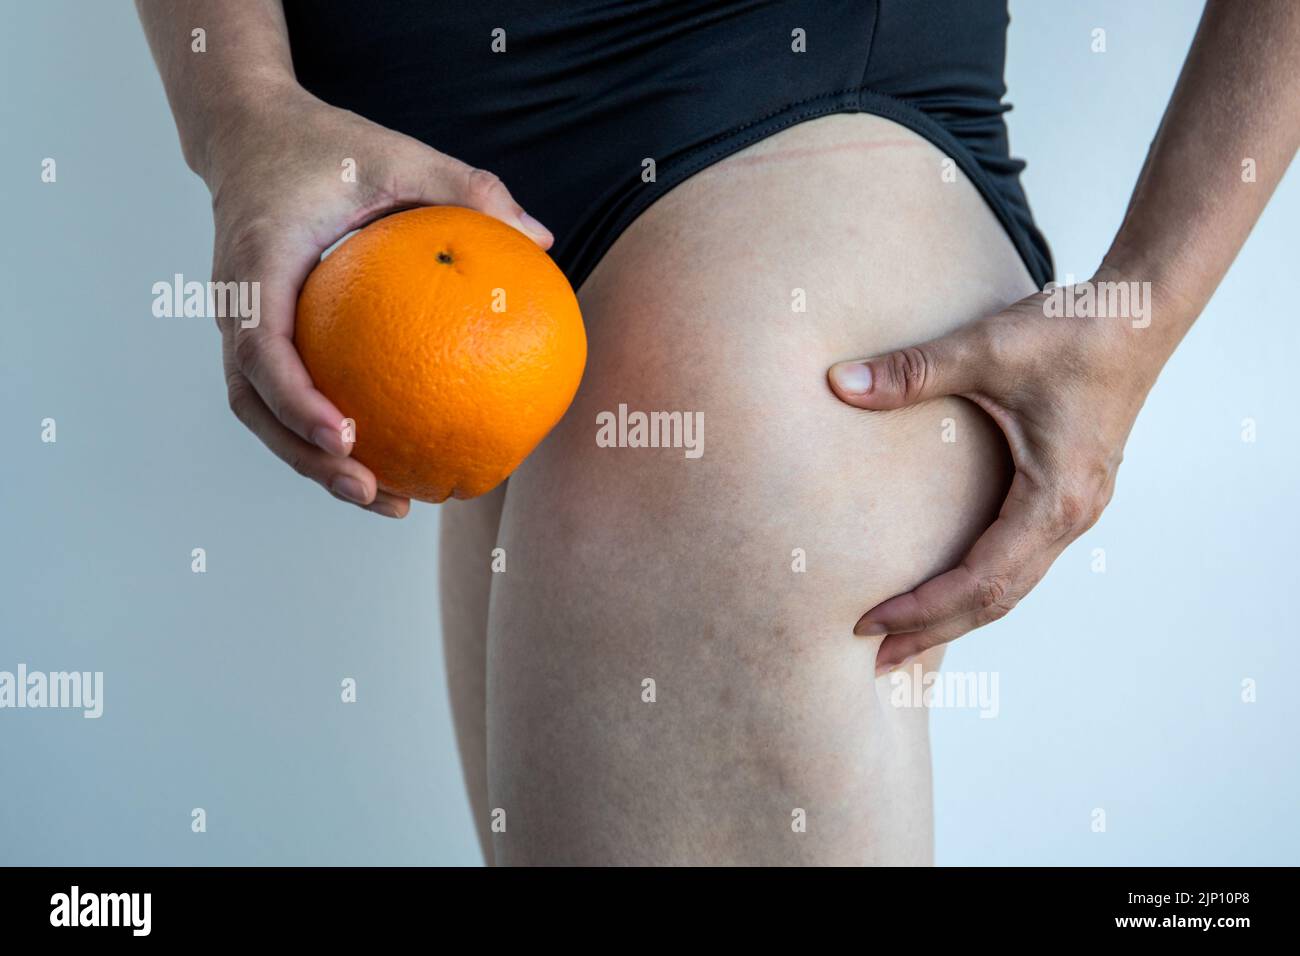 Female thighs and orange in hands. Concept of skin problems and beauty standards. Stock Photo